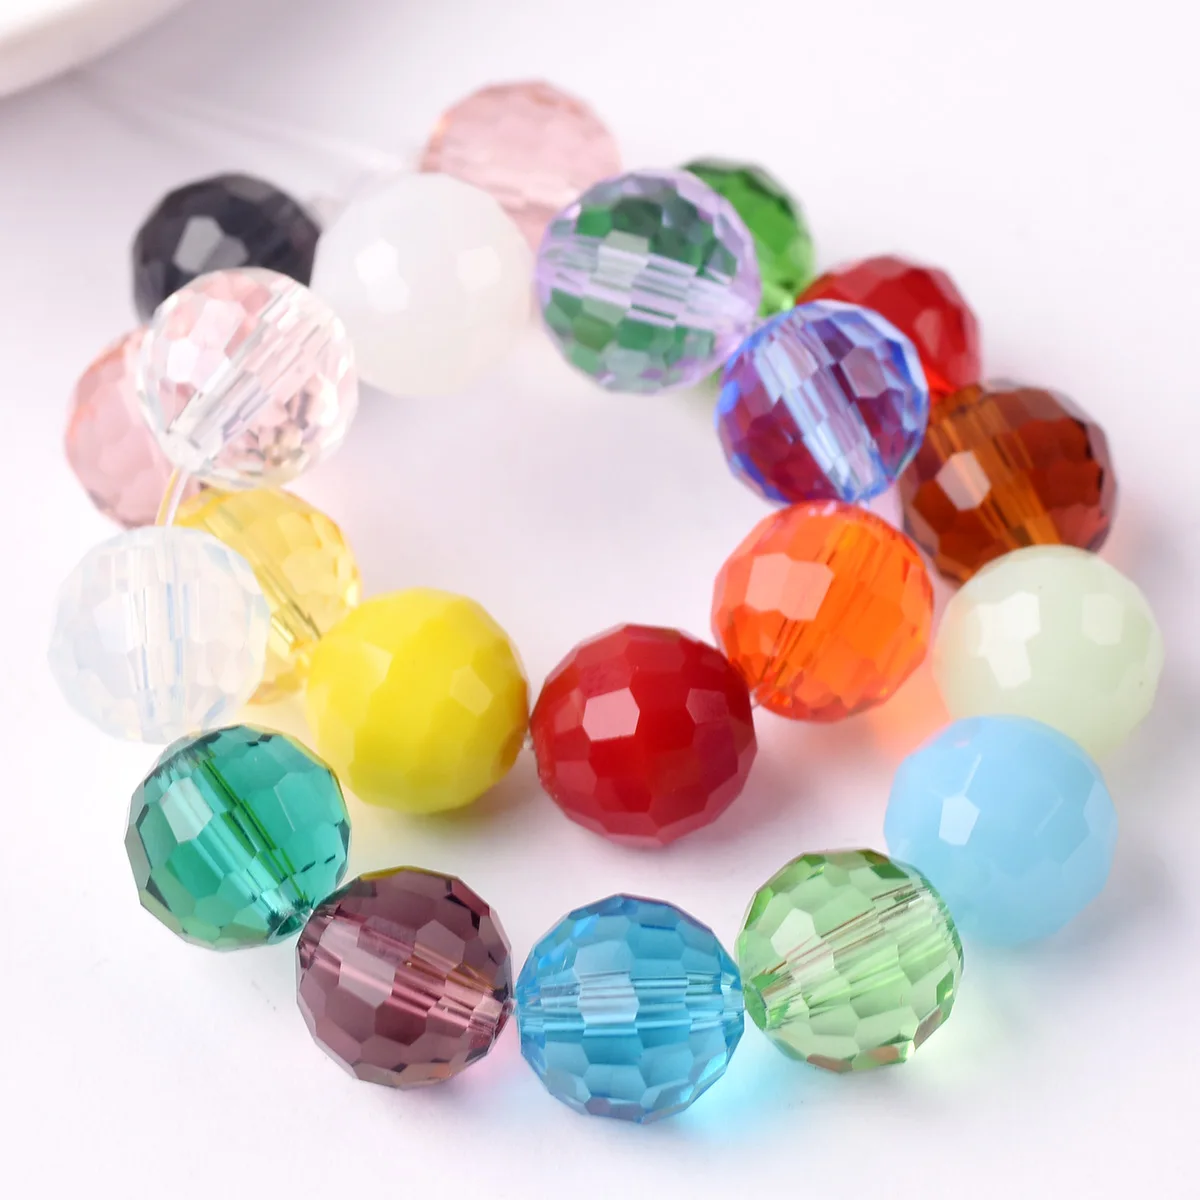 Round 96 Facets 6mm 8mm 10mm 12mm Faceted Crystal Glass Loose Spacer Beads Wholesale Bulk Lot For Jewelry Making Findings 120pcs 6mm round opaque glass loose spacer beads wholesale bulk lot for jewelry making diy crafts findings